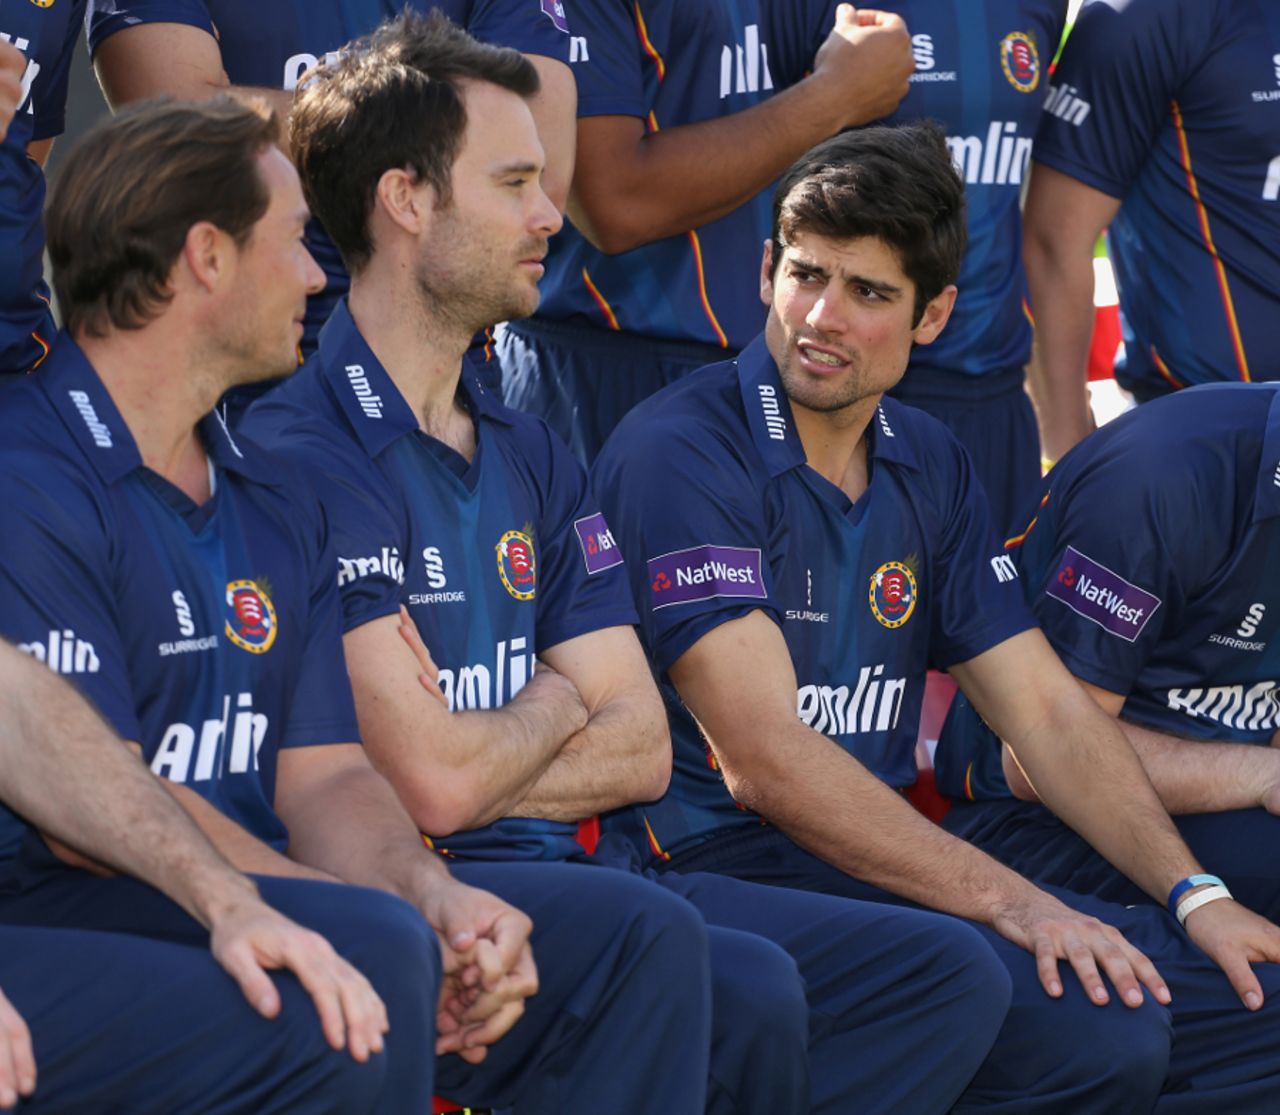 Alastair Cook with his Essex team-mates, Chelmsford, April 1, 2014